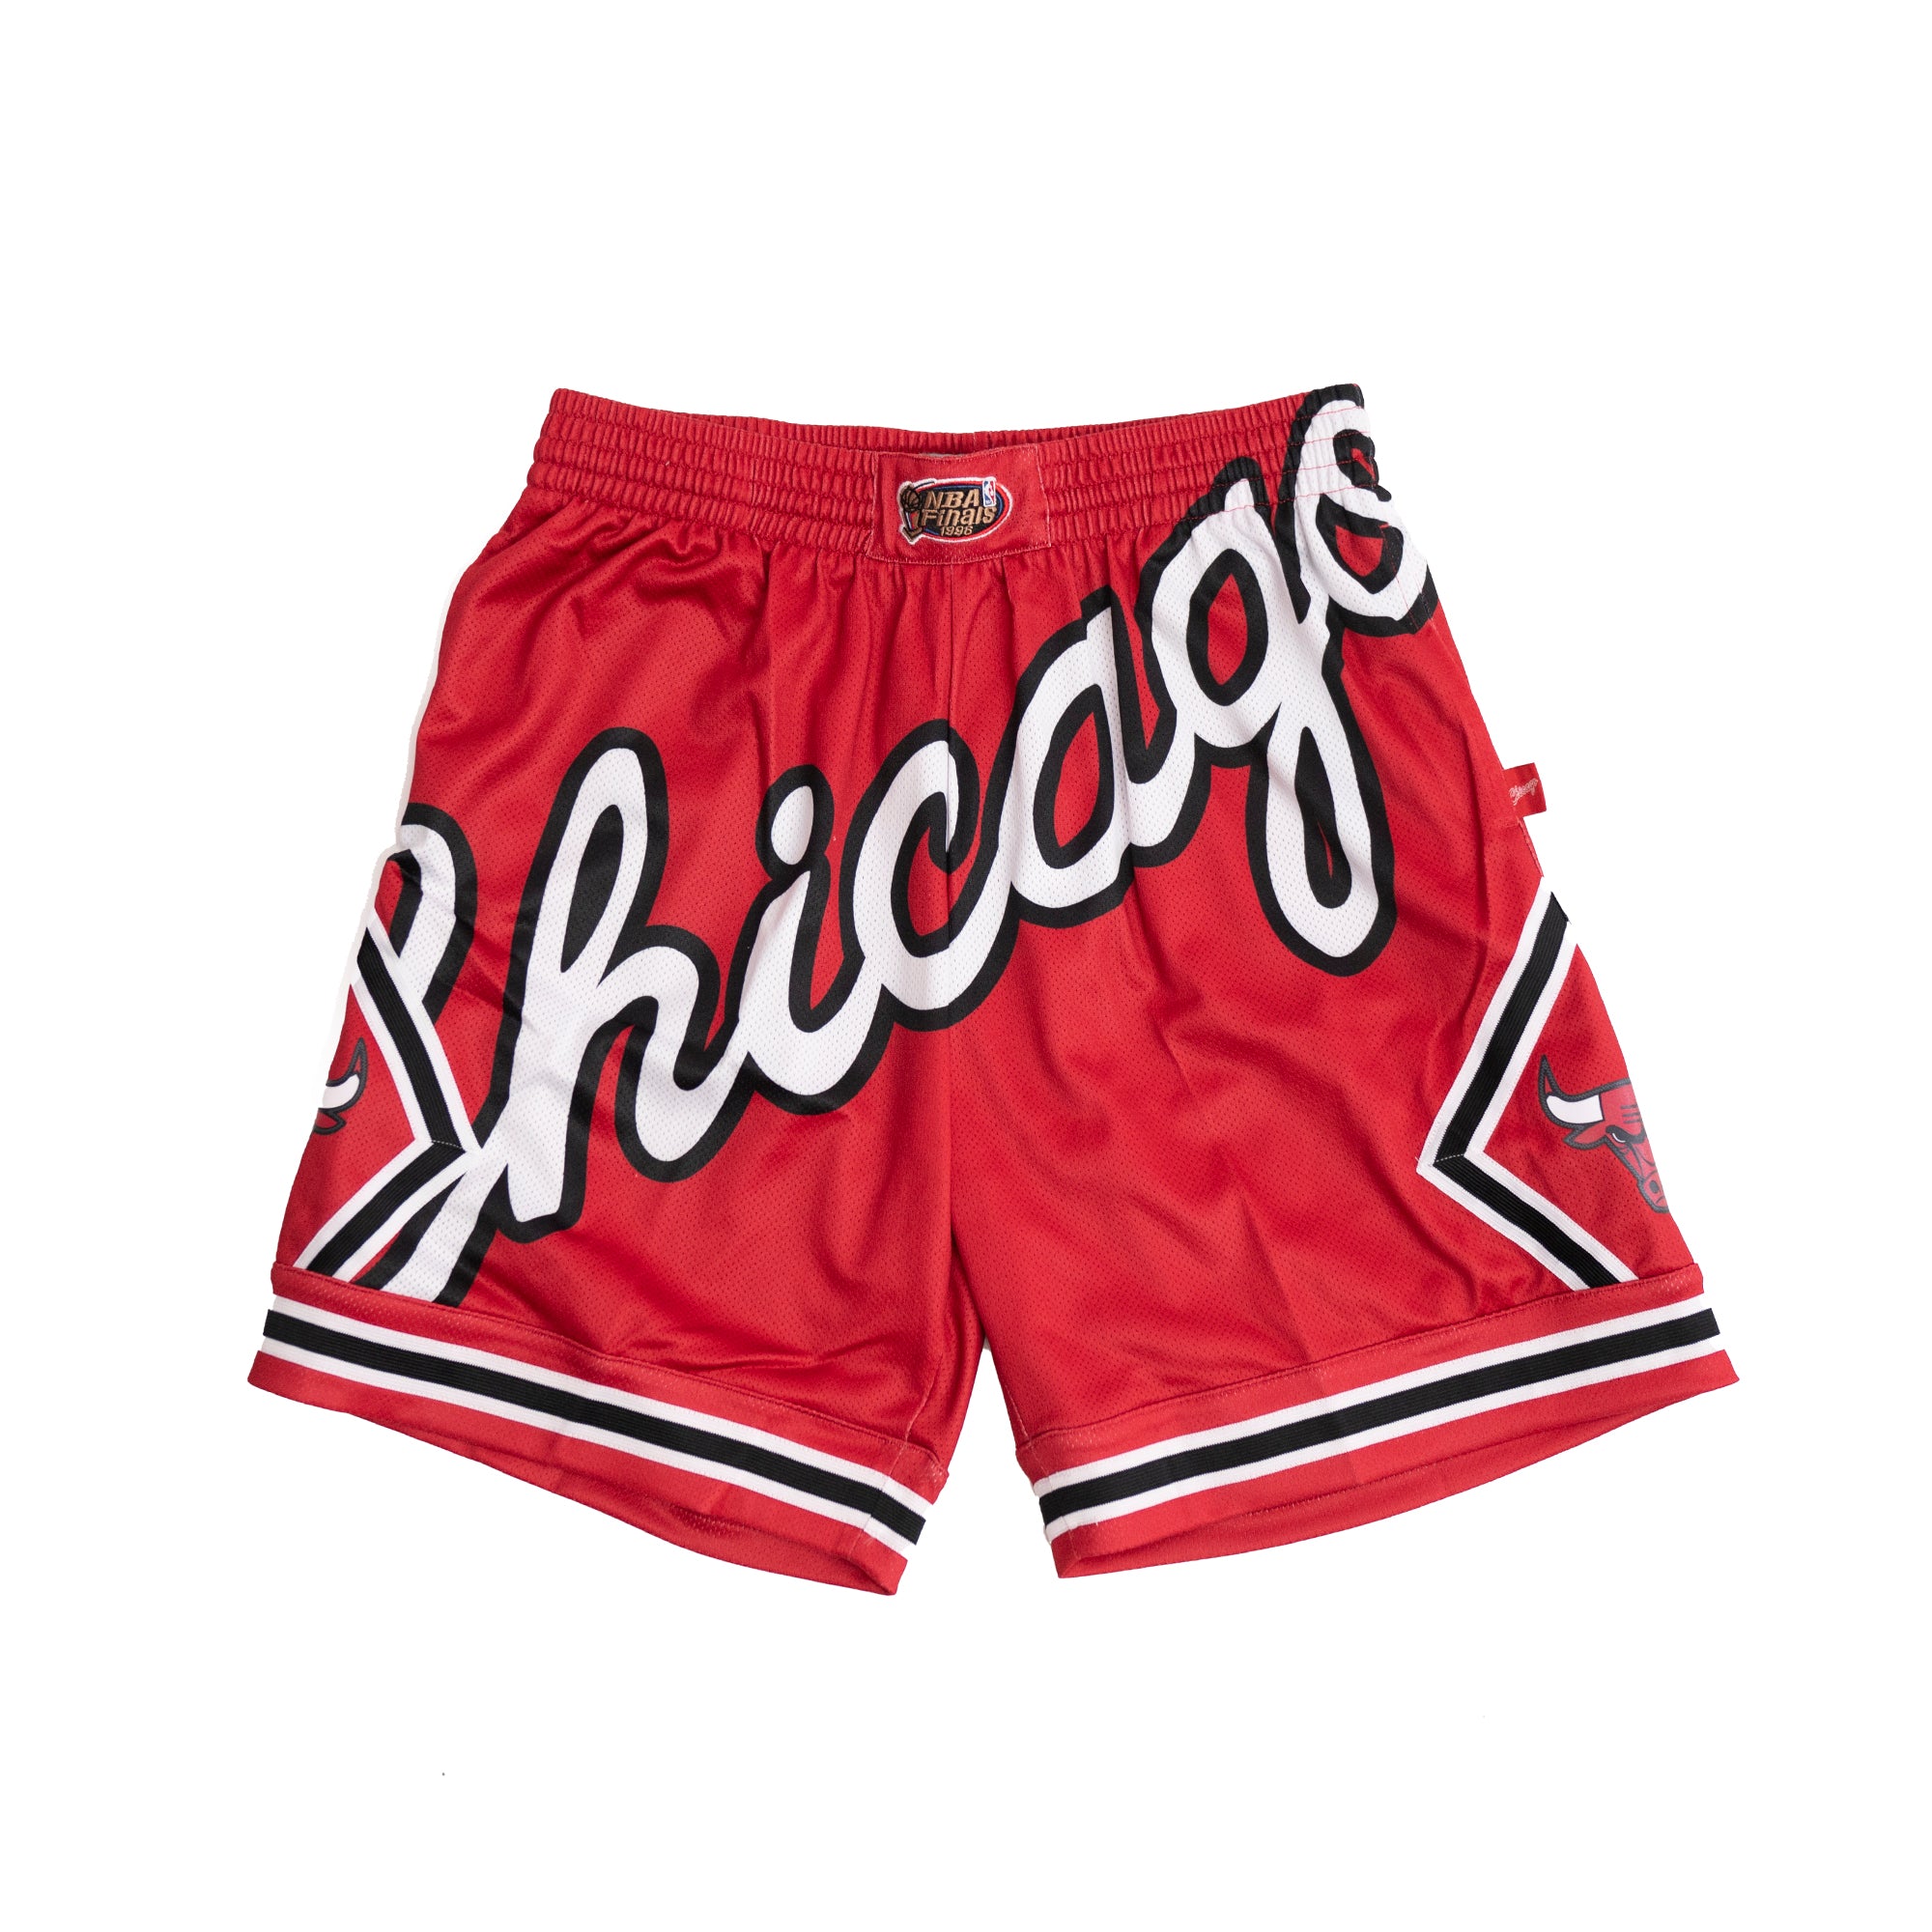 Mitchell & Ness Men's Shorts - Red - L